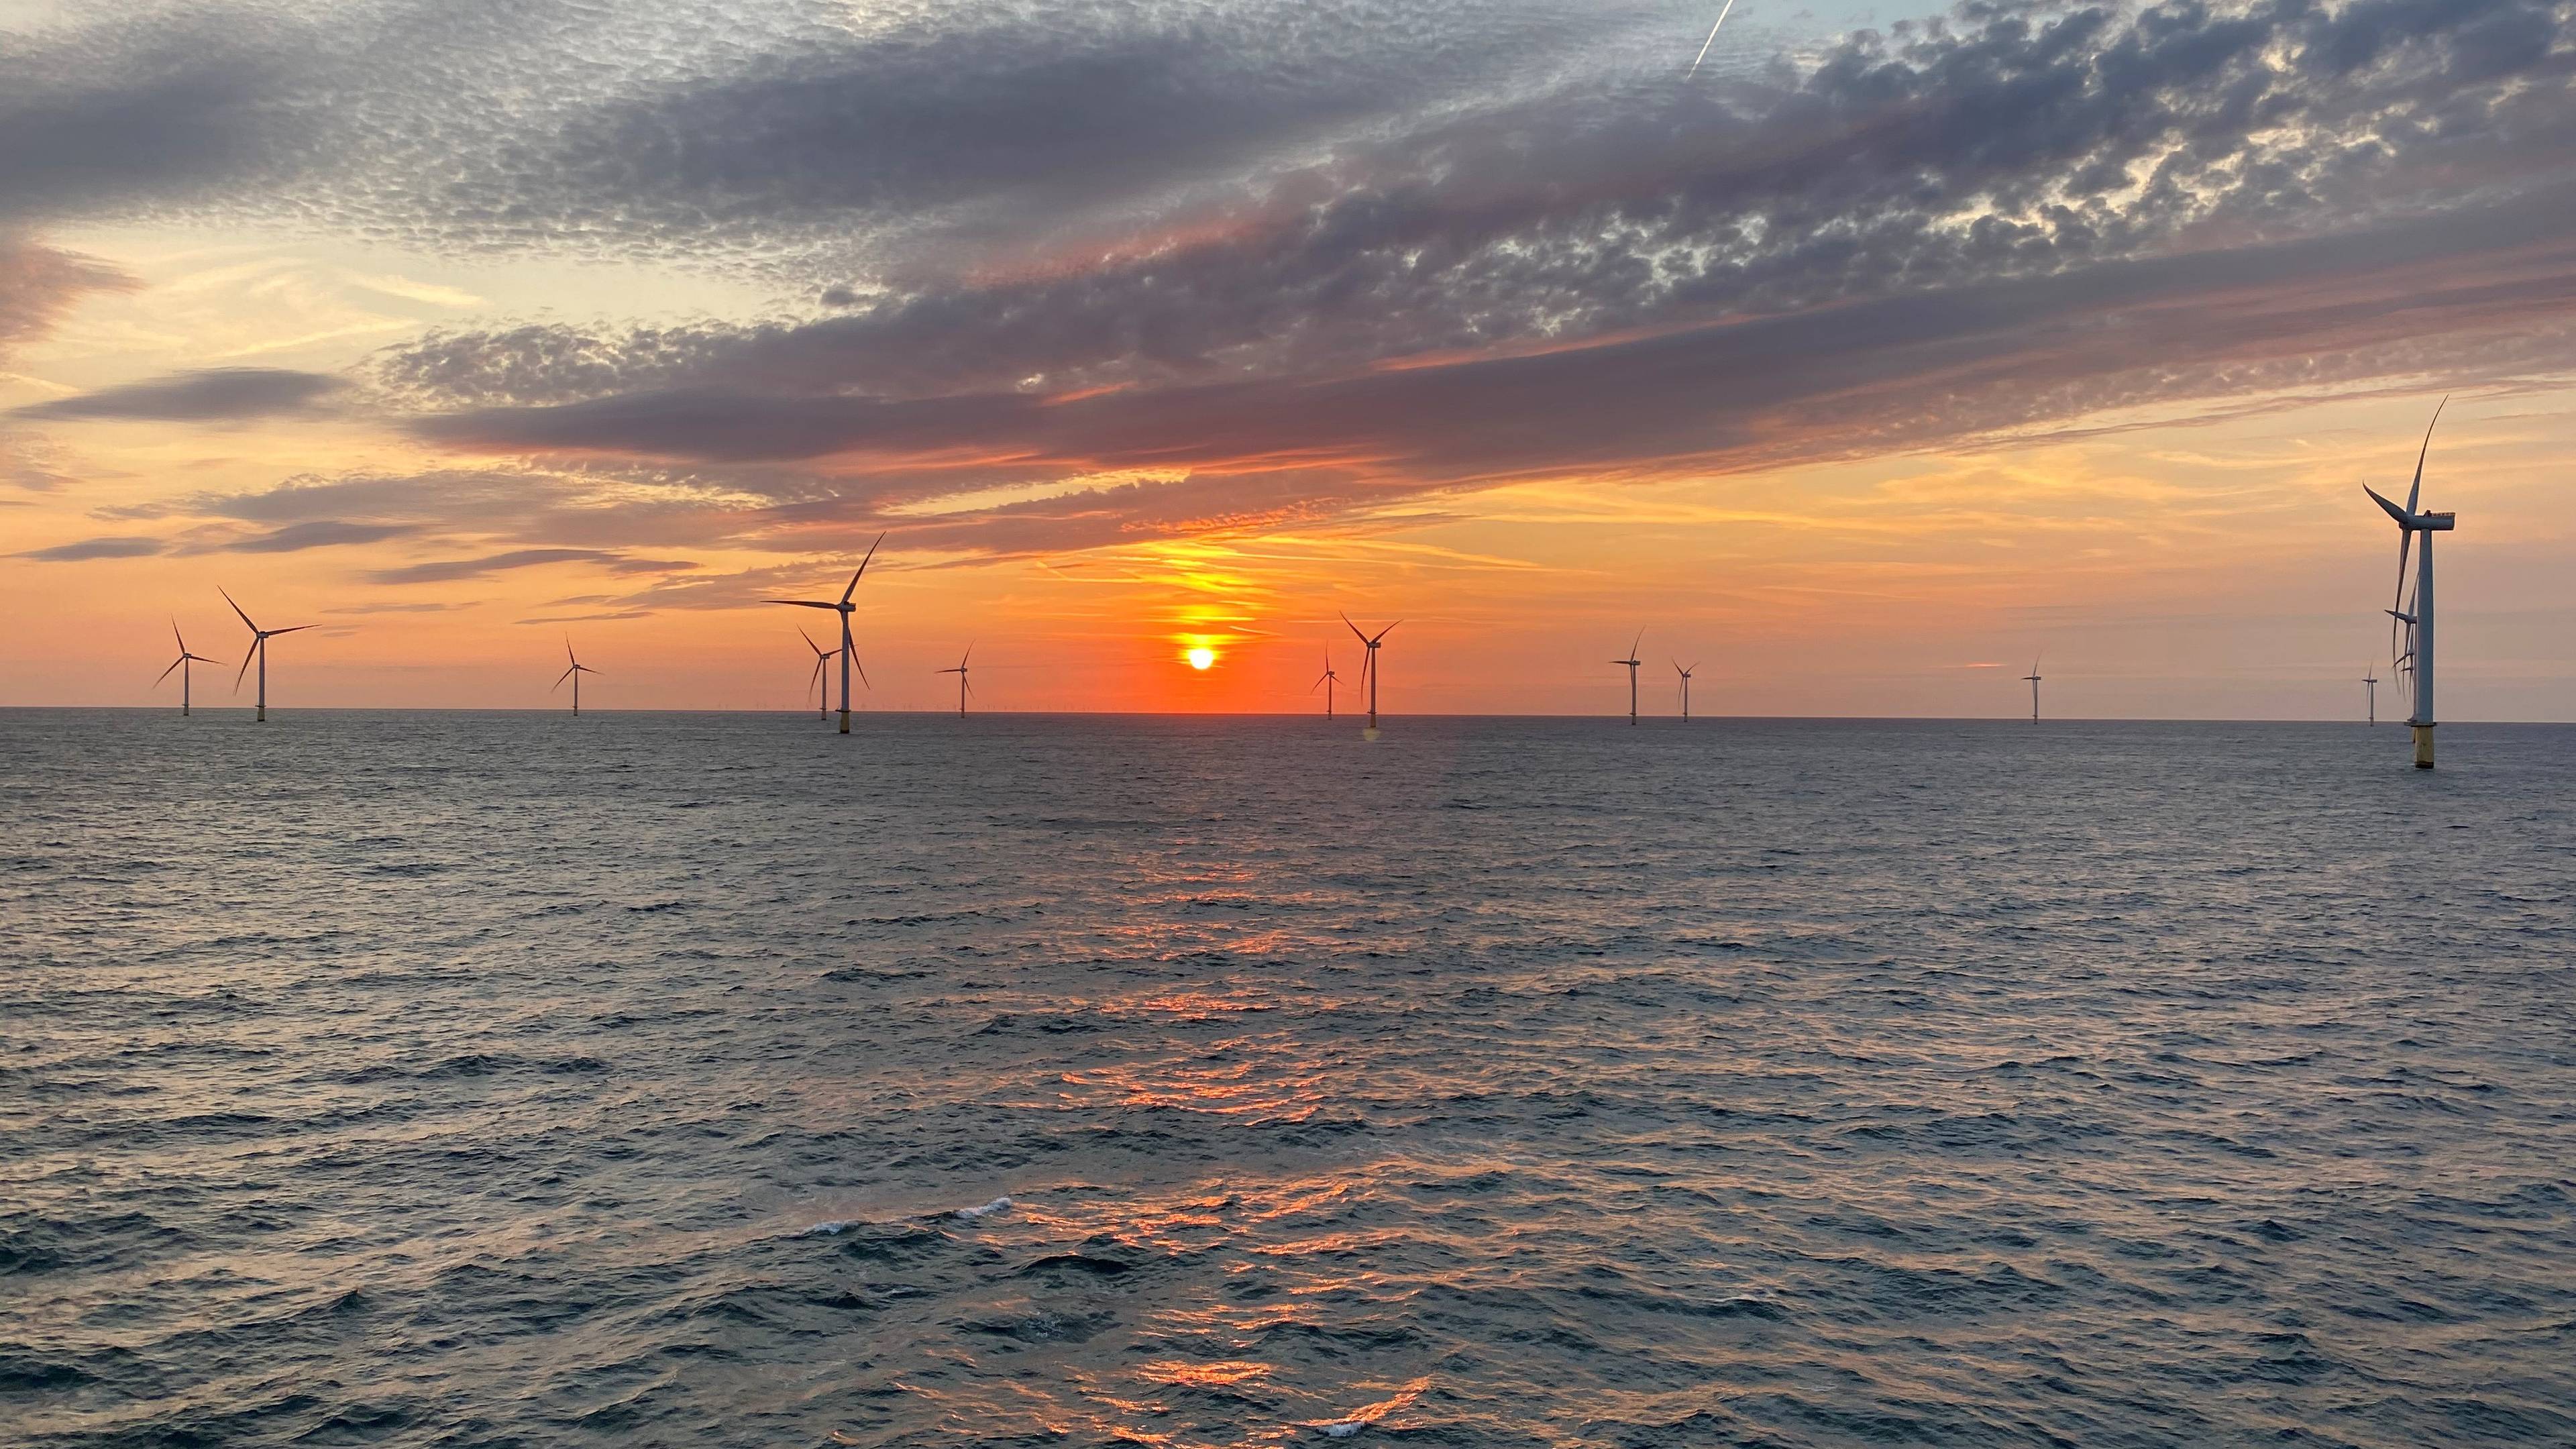 Sunset at the Dudgeon wind farm